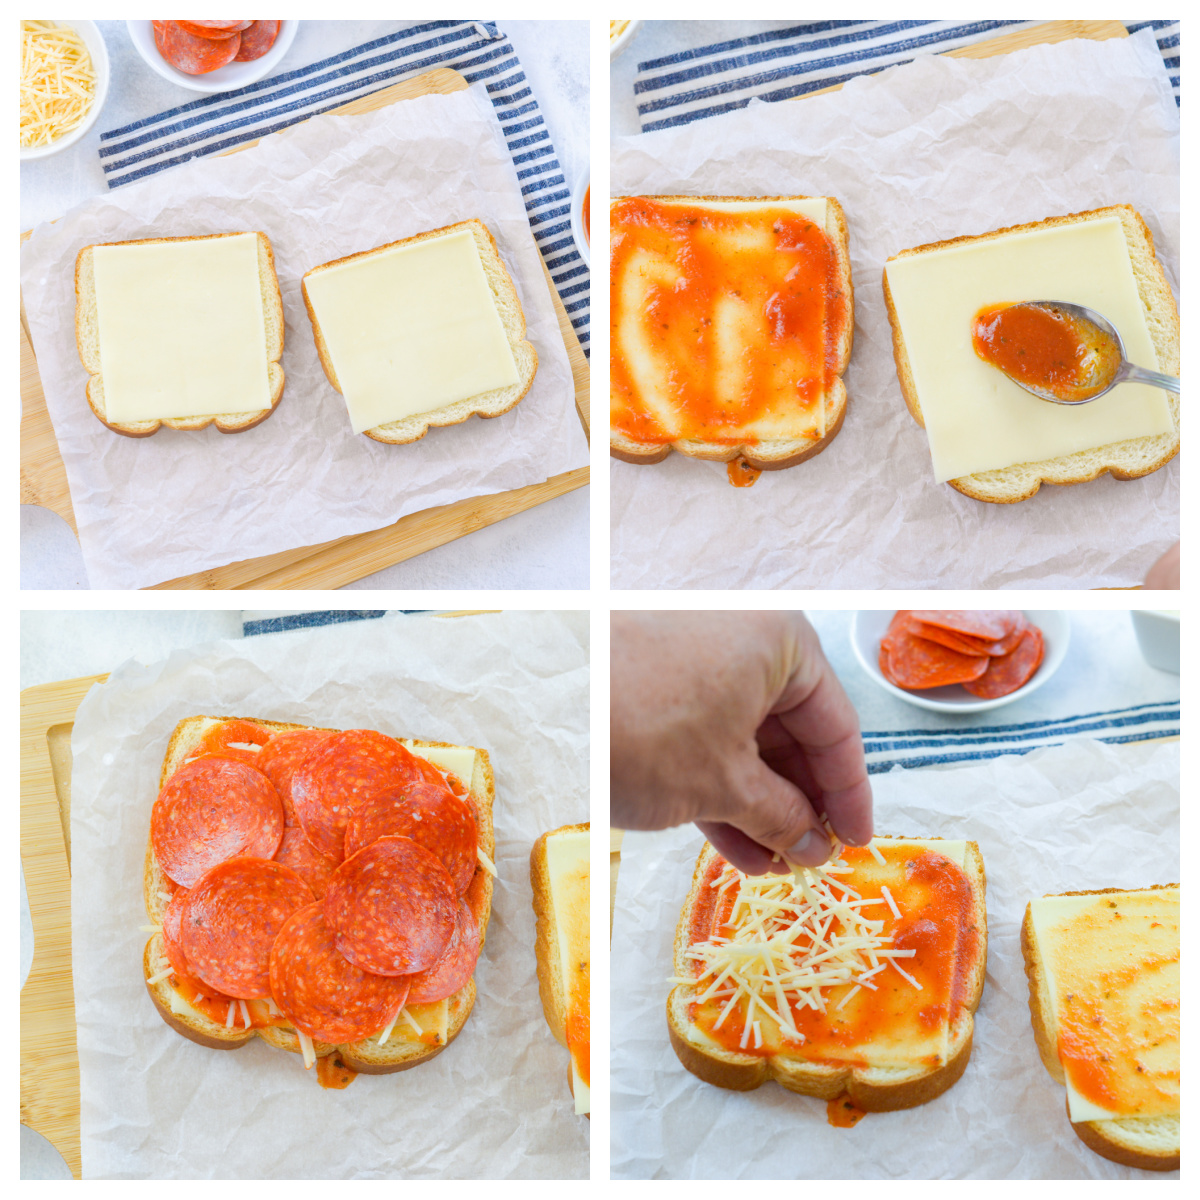 Adding cheese, pizza sauce, and pepperoin to a slice of bread.